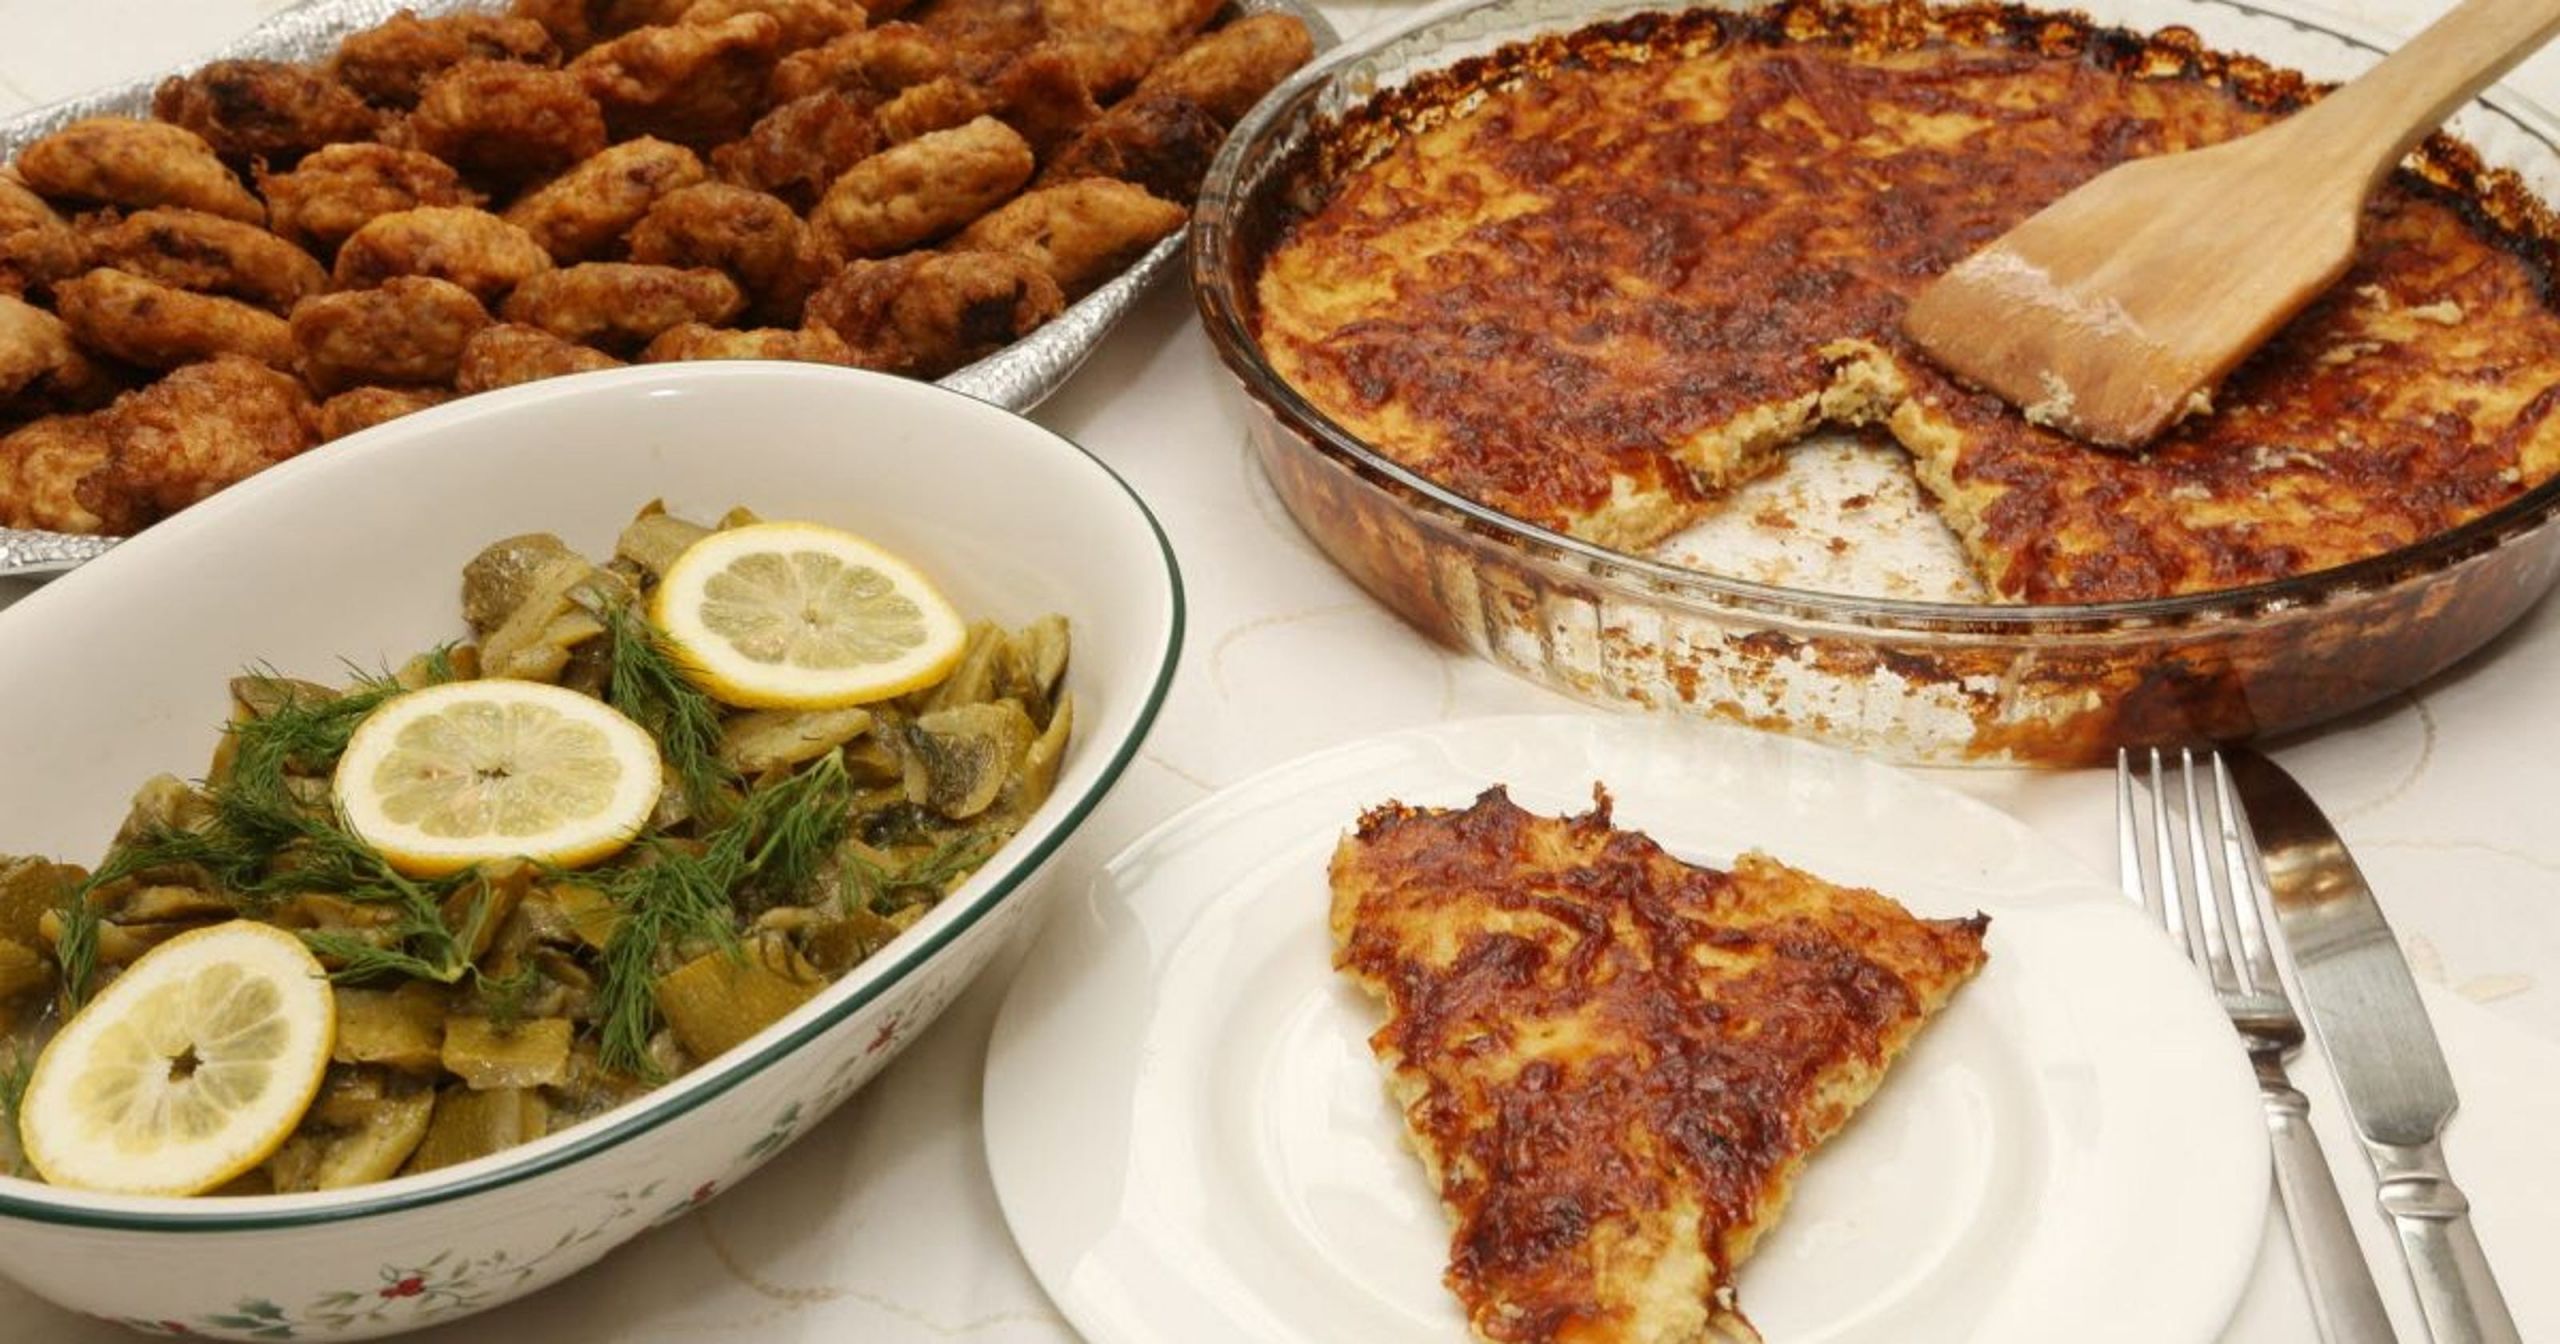 Passover Food
 Passover seder menu ideas with Sephardic flavors